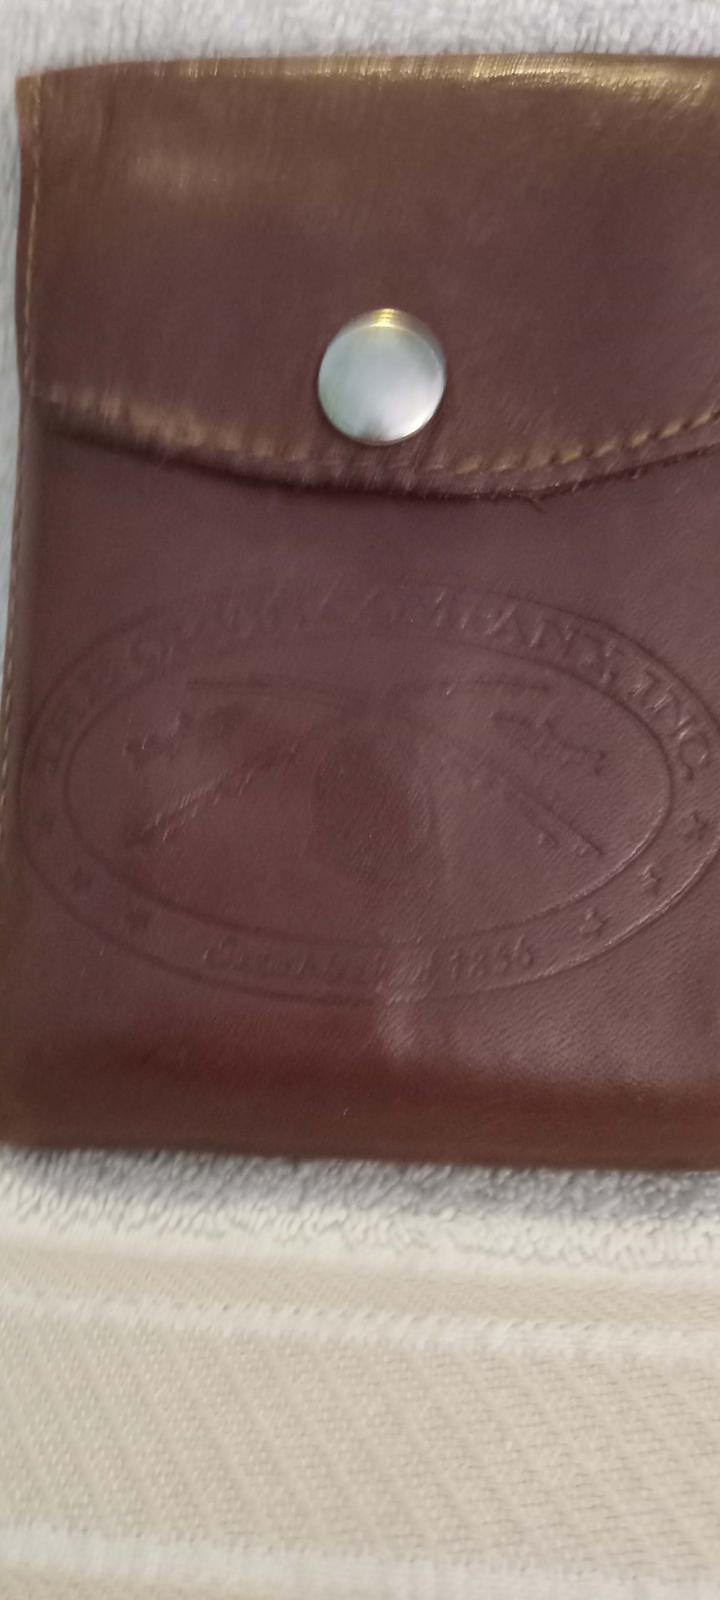 ORVIS LEATHER LEADER FLY WALLET | The Angling Marketplace